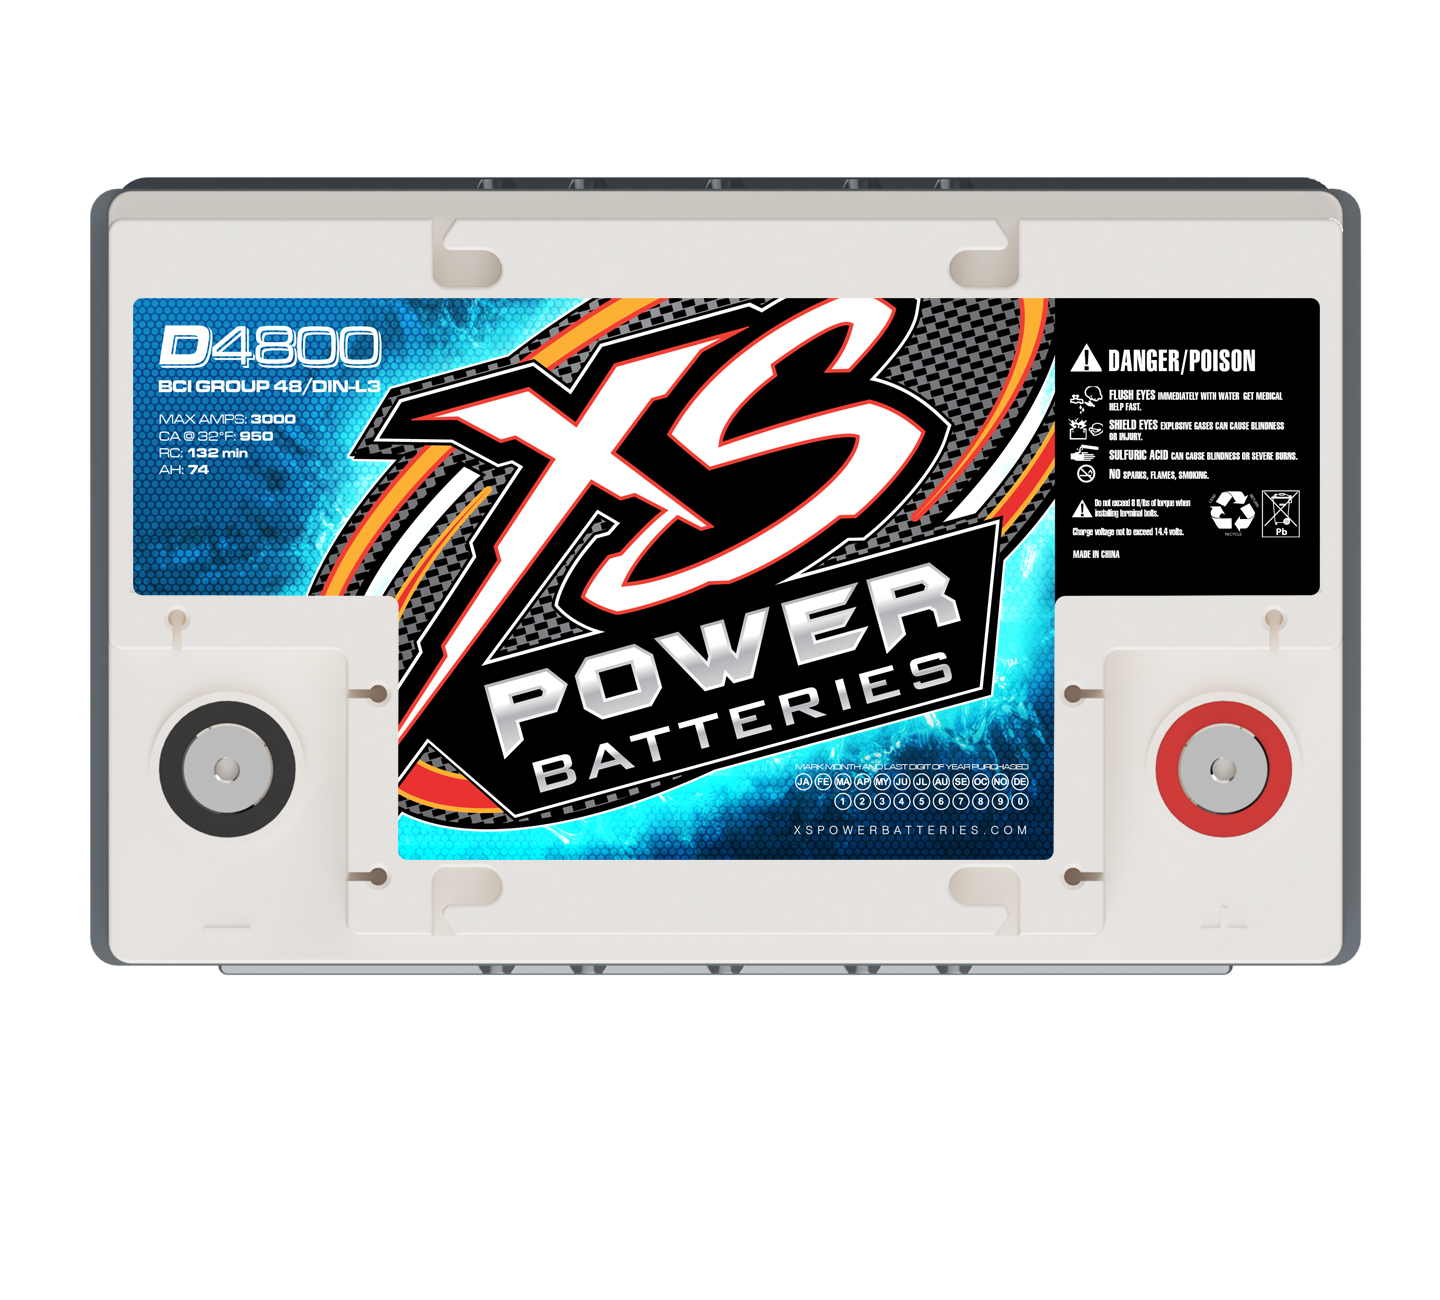 I have a 2020 chevrolet silverado 1500 what xs power battery is recommended?